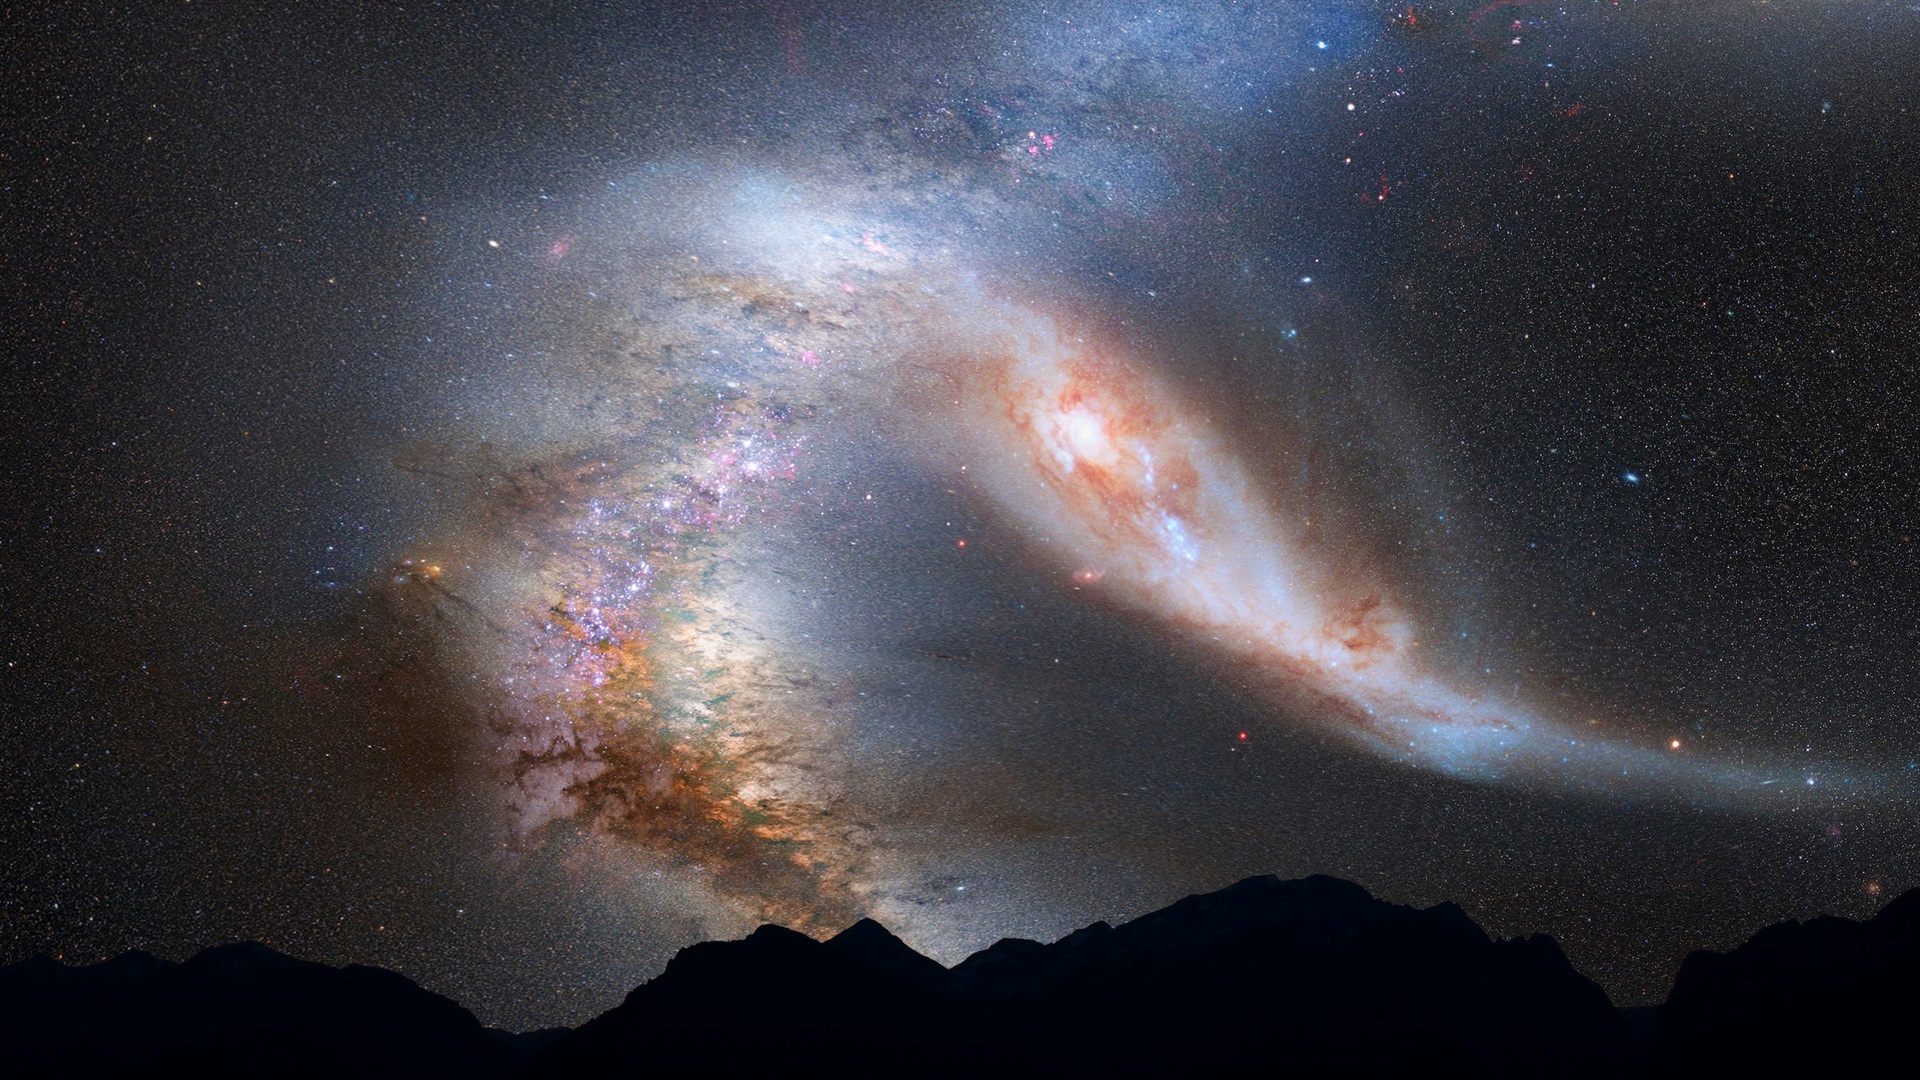 An illustration shows the Andromeda galaxy interacting with the Milky Way, as it would appear from Earth about 3.75 billion years from now. NASA, ESA, Z. Levay and R. van der Marel (STScI), 